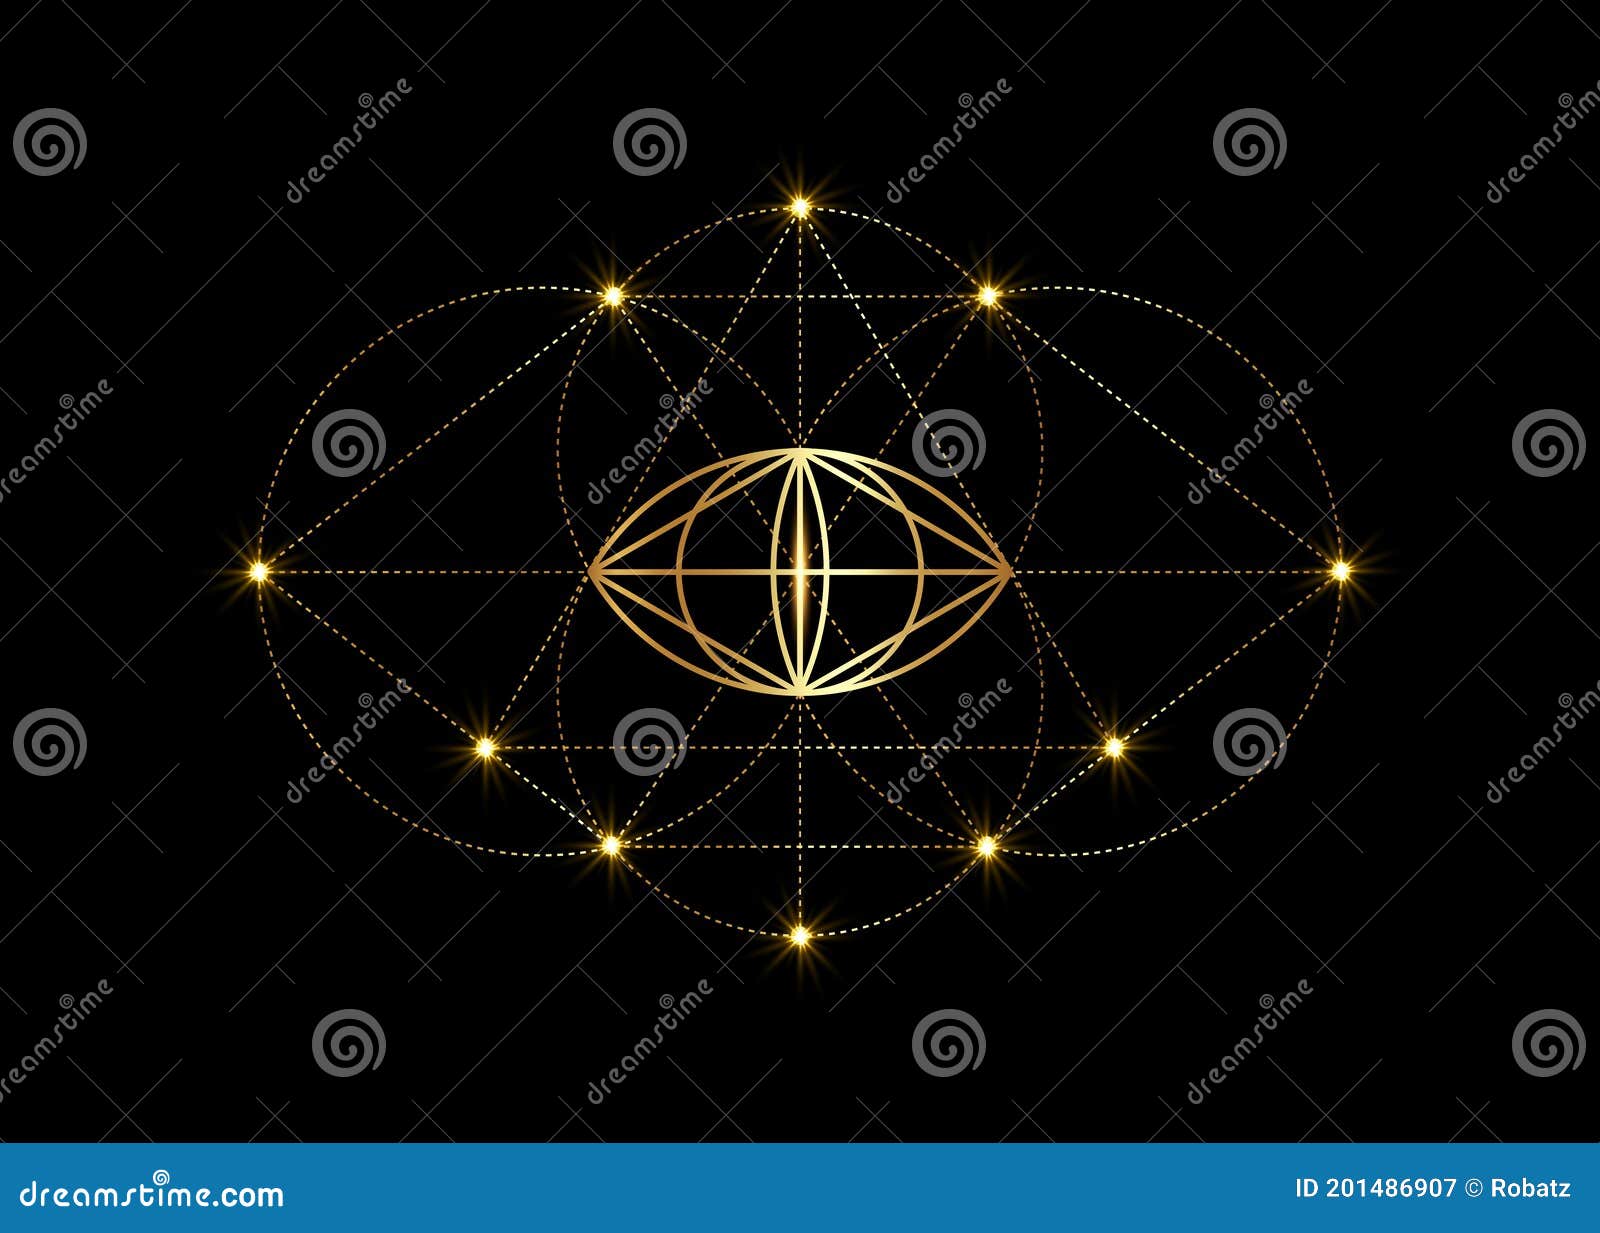 vesica piscis gold sacred geometry. all seeing eye, the third eye or the eye of providence inside triangle pyramid. the phi mystic